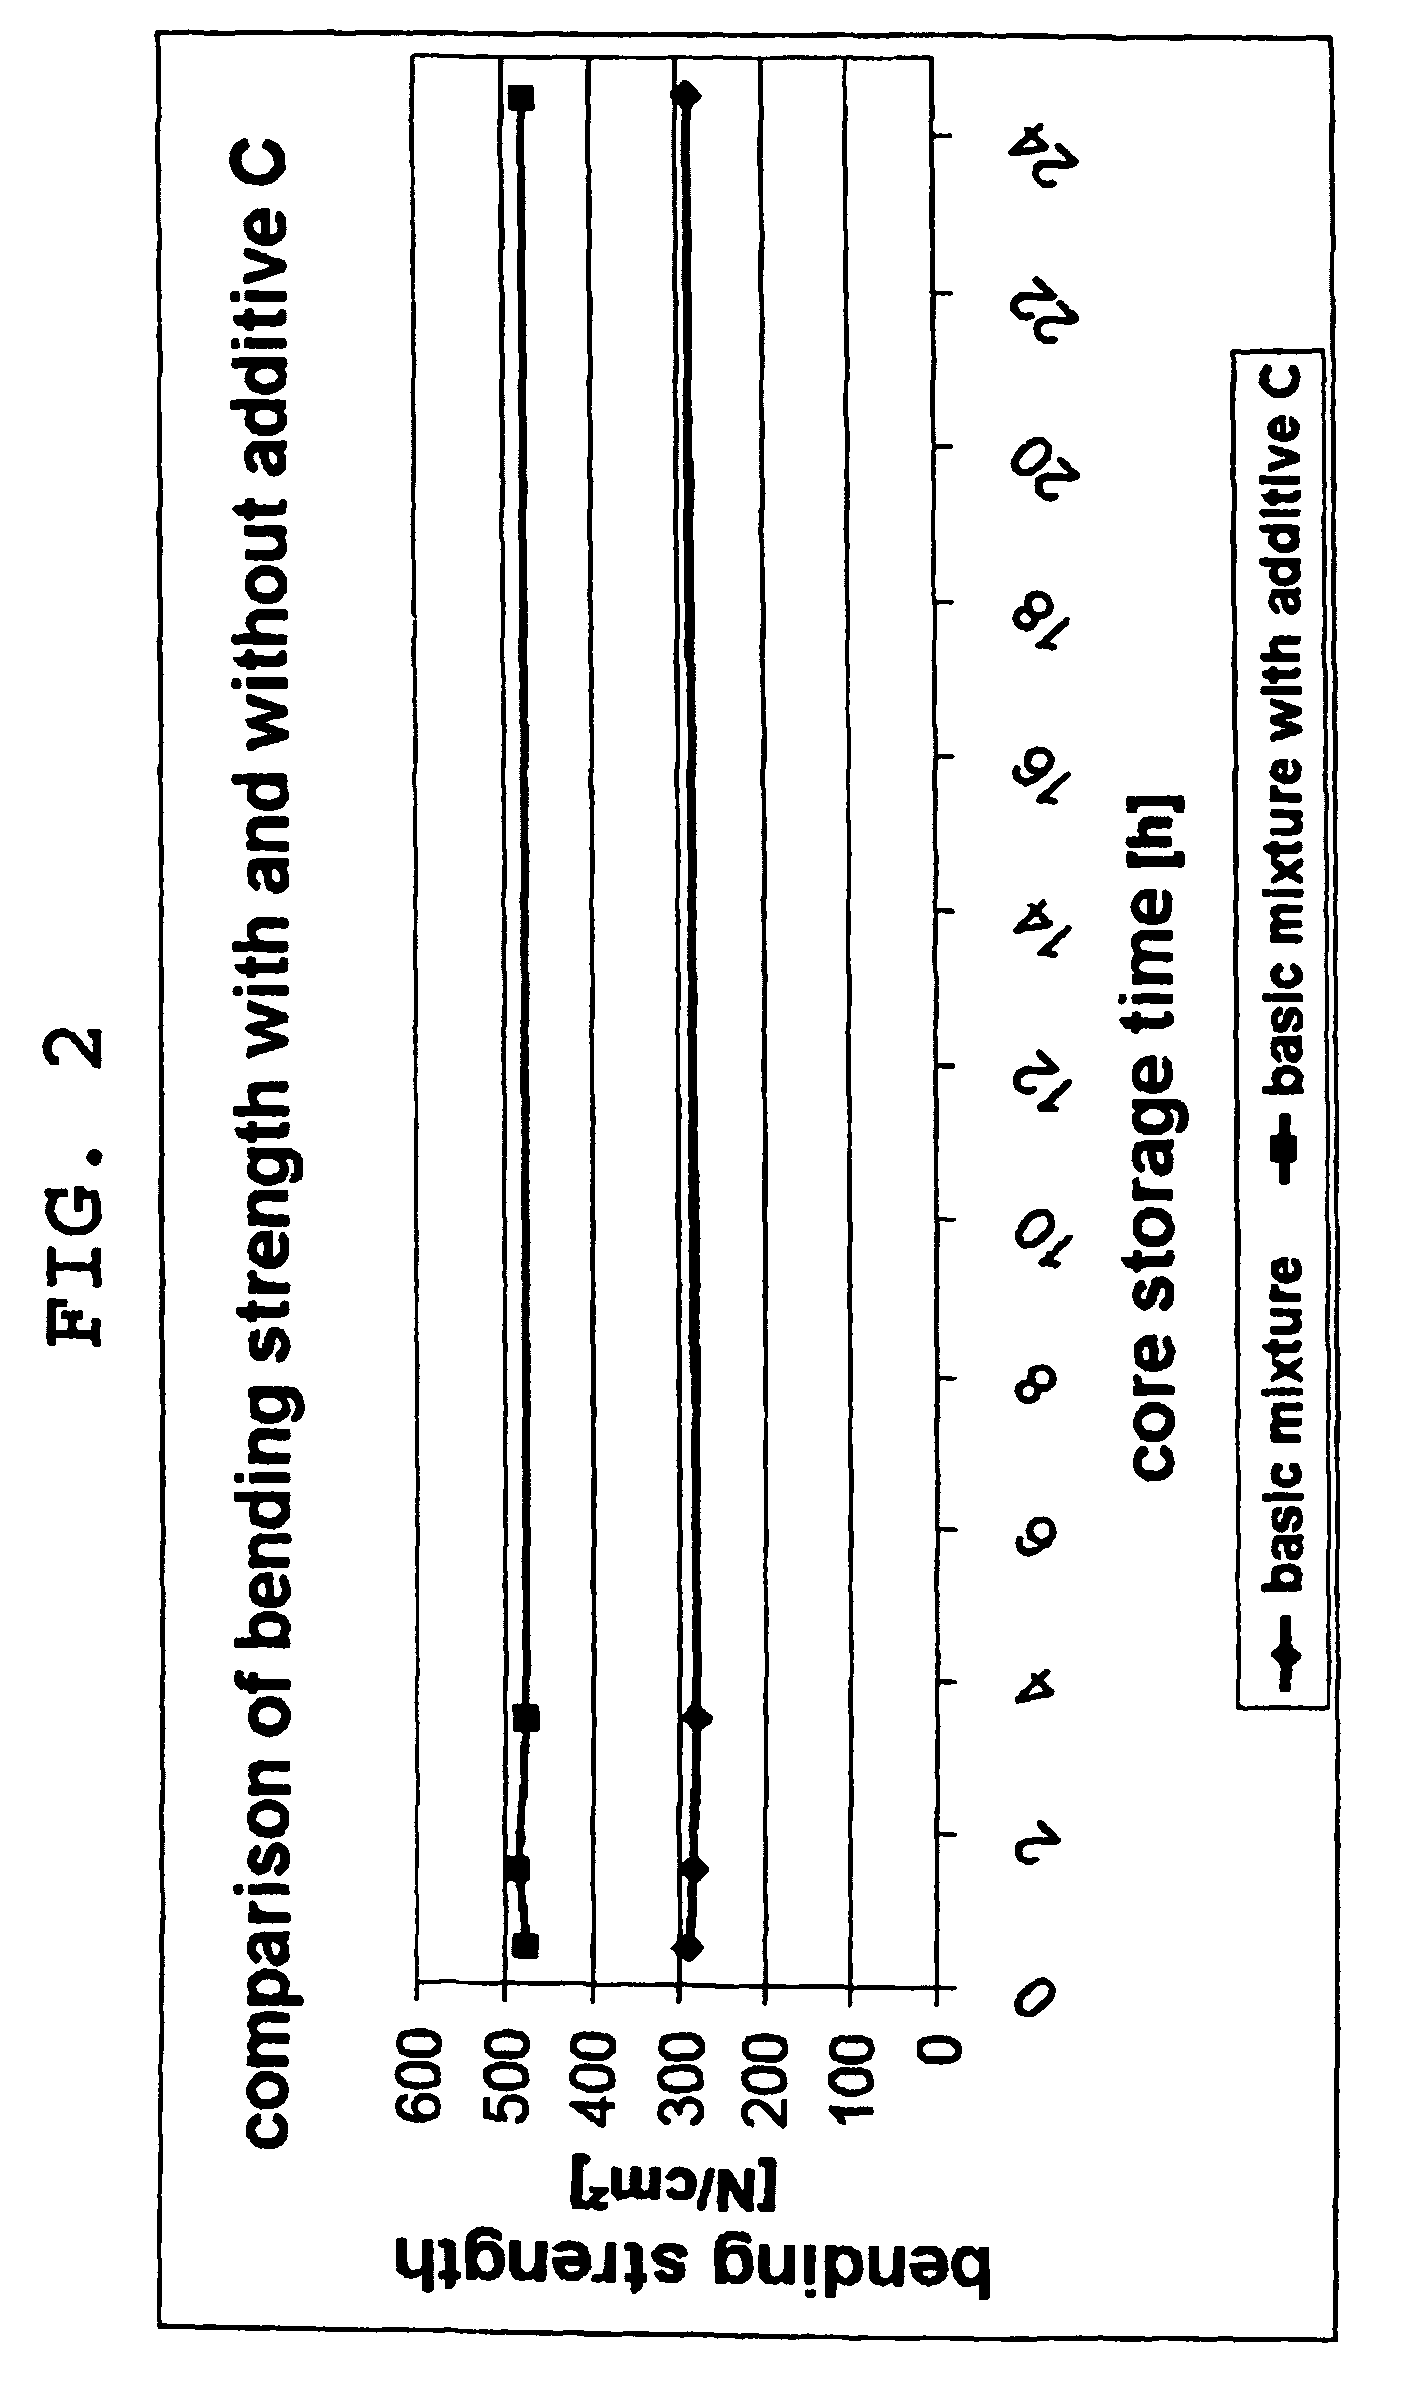 Molding material mixture, molded part for foundry purposes and process of producing a molded part